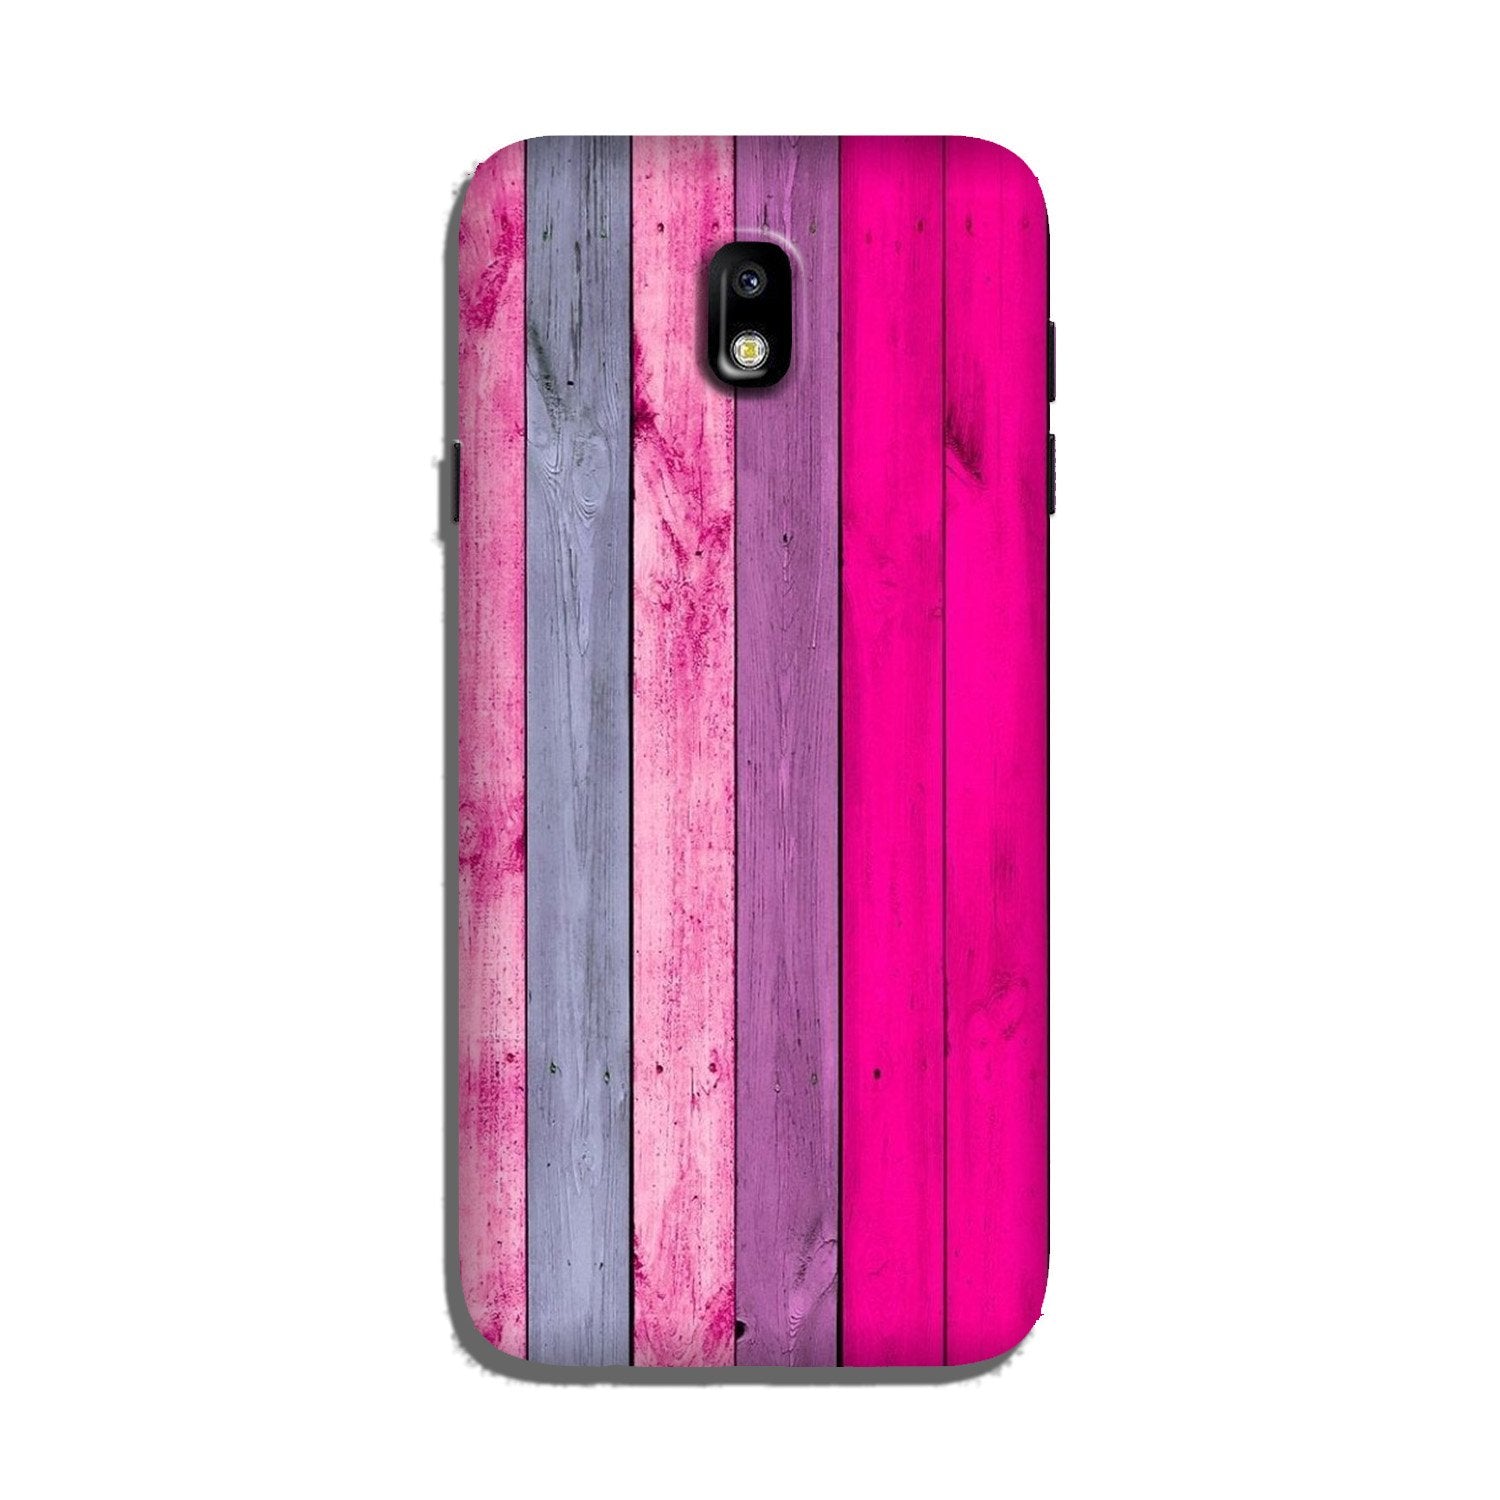 Wooden look Case for Galaxy J5 Pro